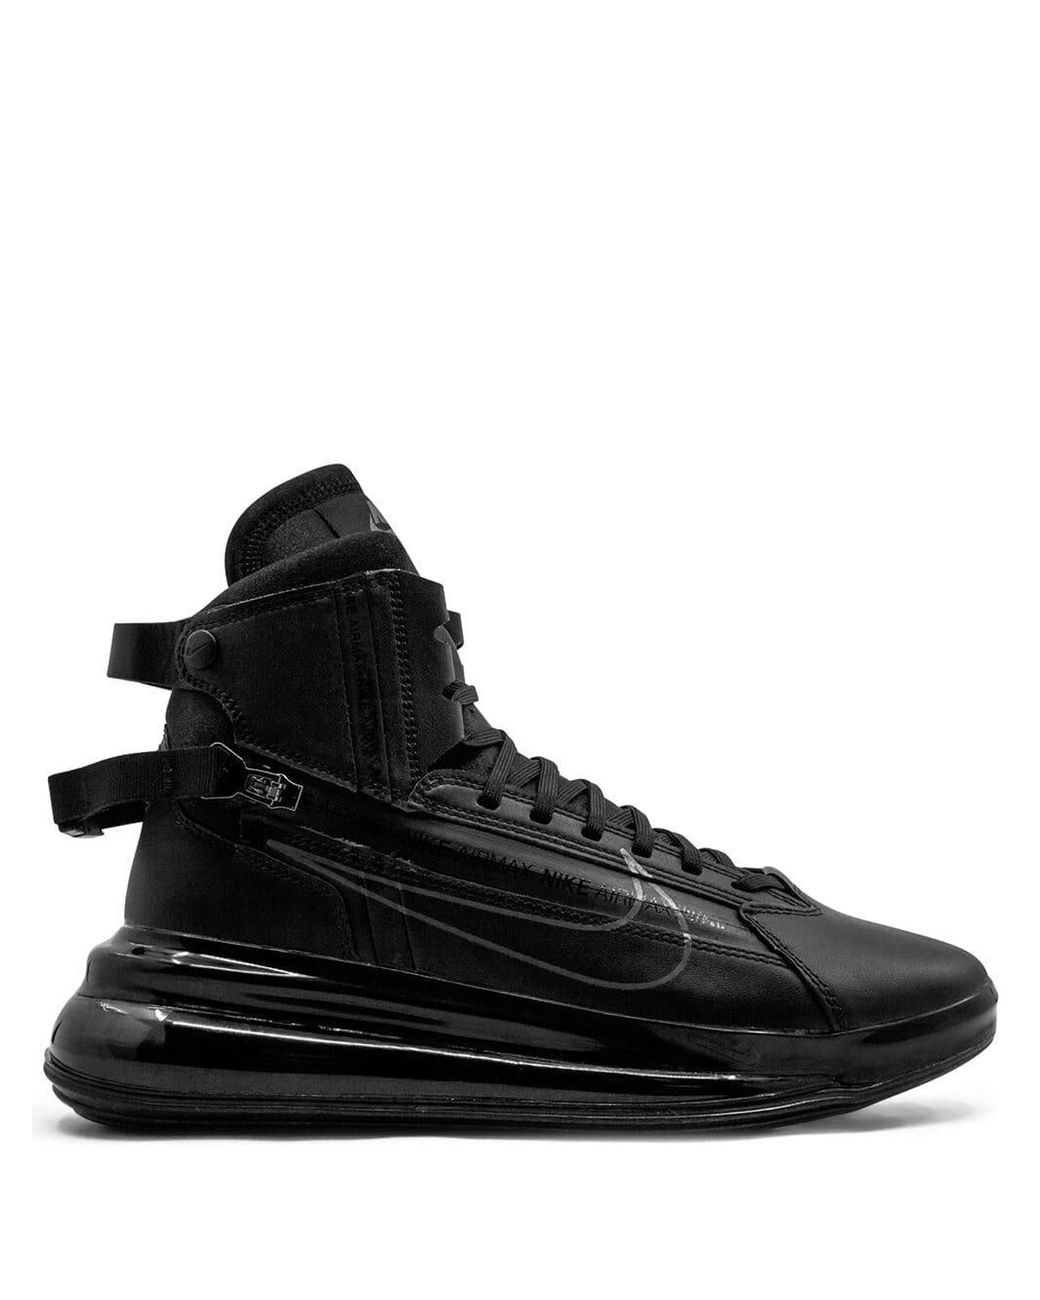 Retired Put up with Connected Nike Air Max 720 Saturn Black Dark Grey for Men | Lyst